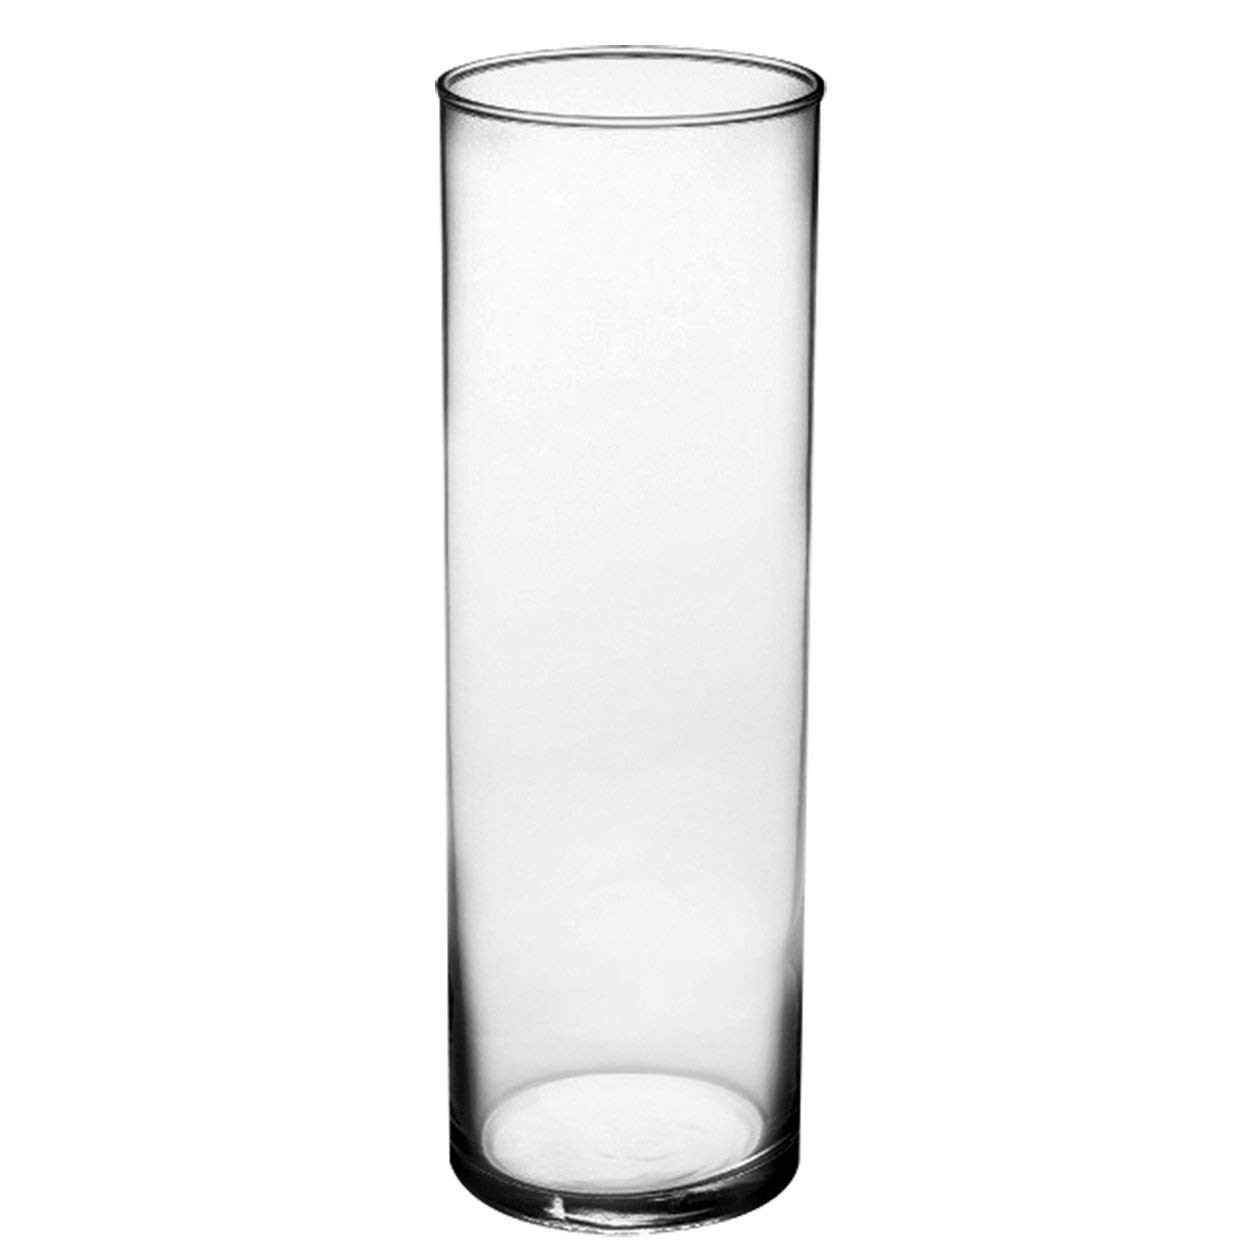 9 inch glass vase of amazon com syndicate sales 3 1 2 x 10 1 2 cylinder vase clear throughout amazon com syndicate sales 3 1 2 x 10 1 2 cylinder vase clear planters garden outdoor